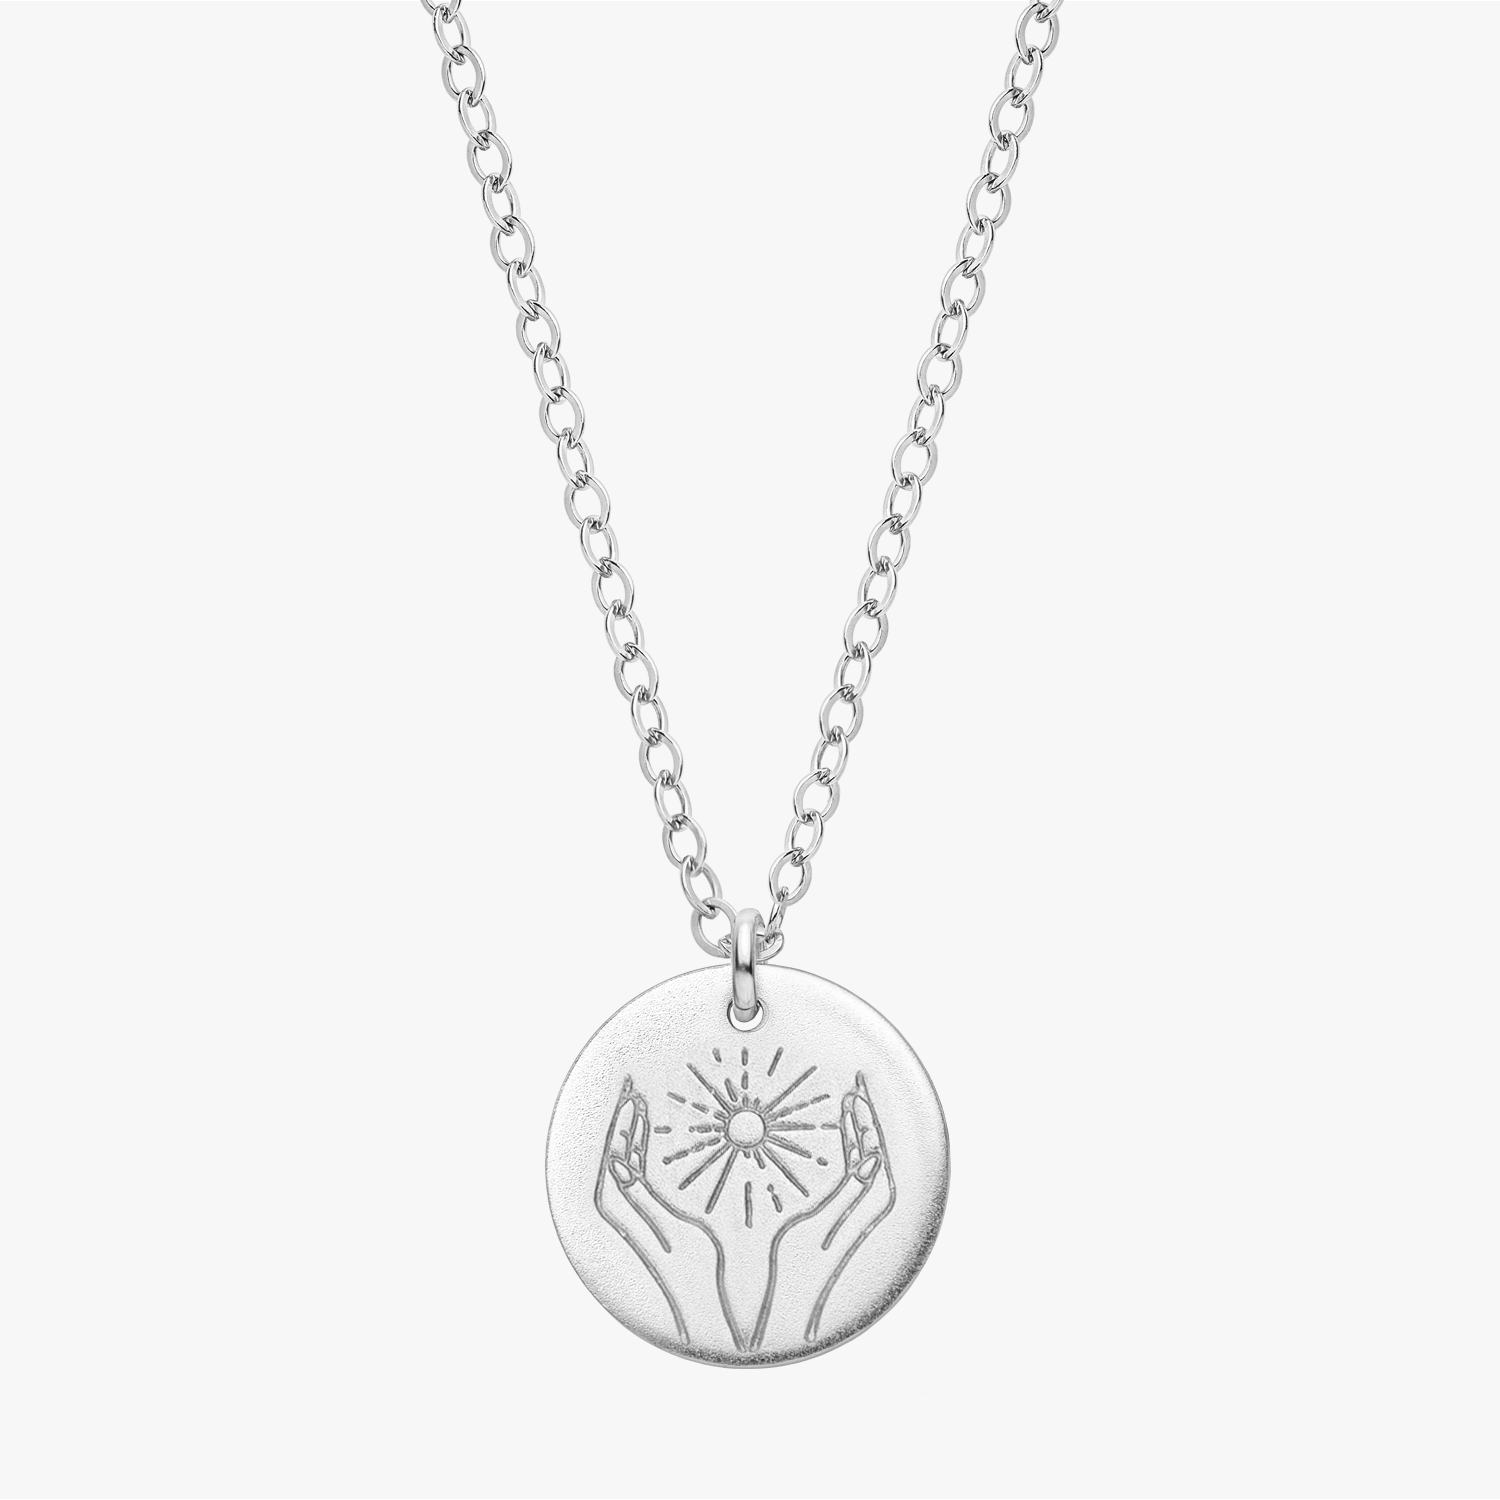 Personalized Tarot Necklace